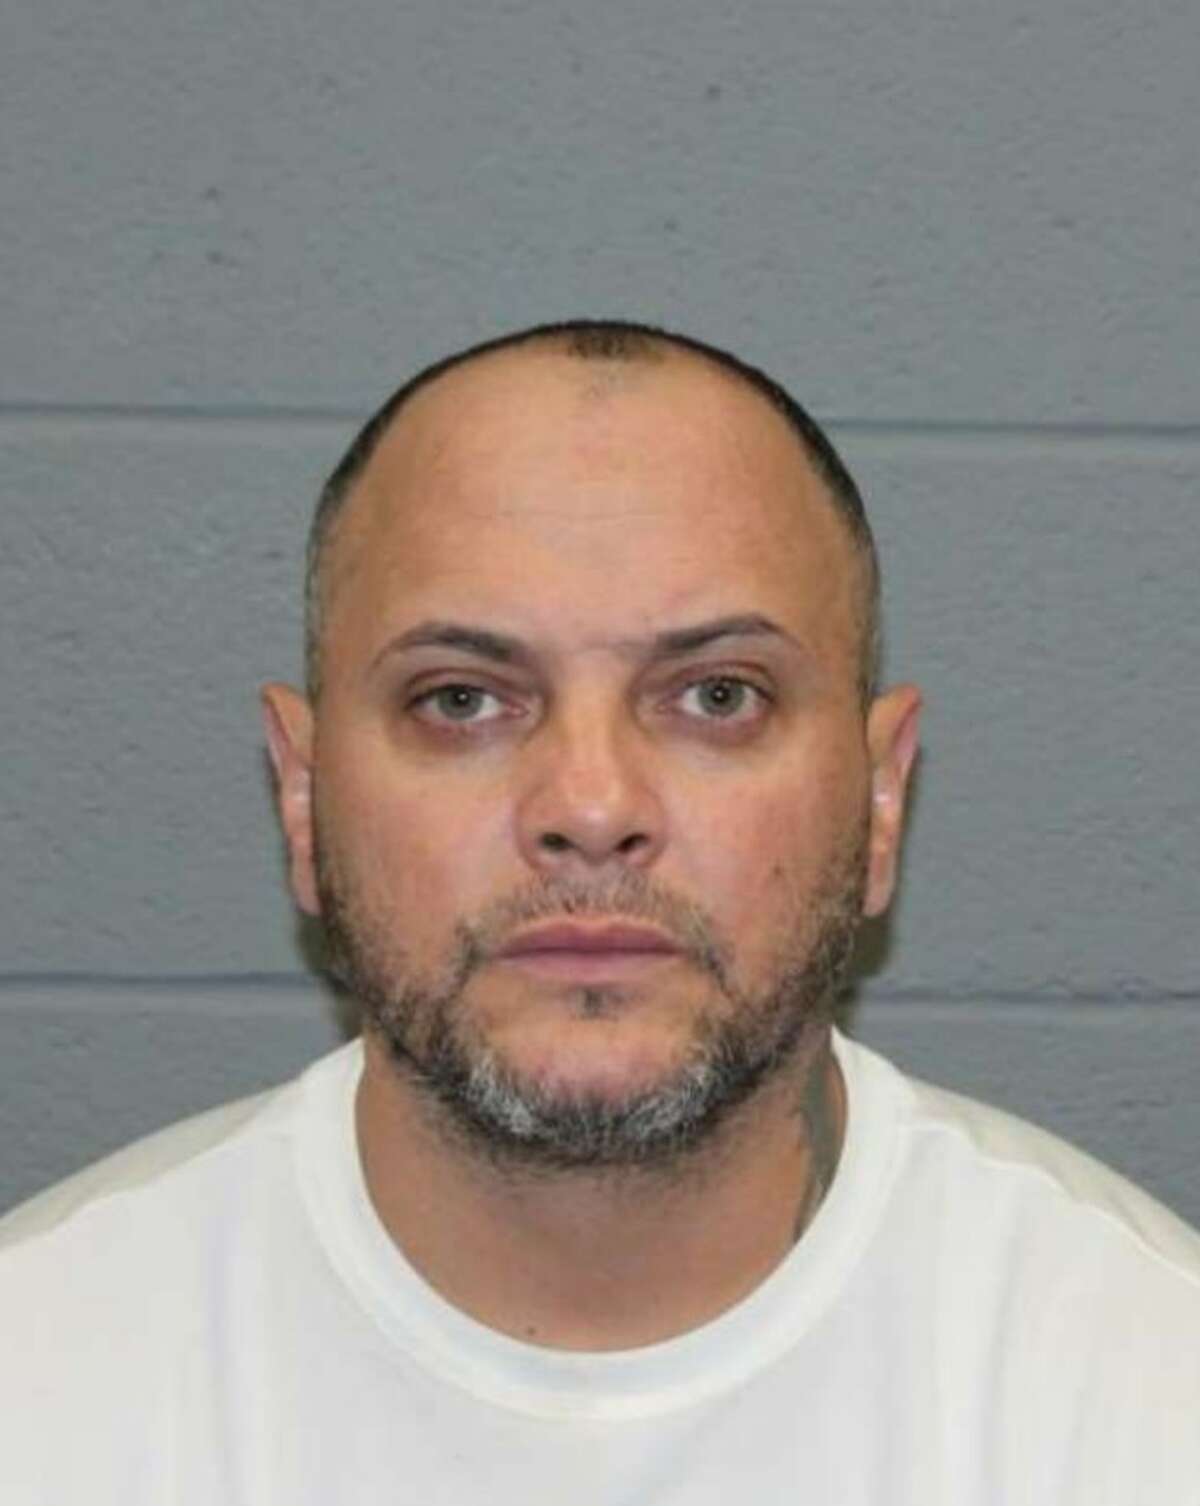 Carlos Baez, 40, was one of eight people arrested on drug charges Monday during a raid on a Baldwin Street business implicated in narcotics trafficking, according to Waterbury police.